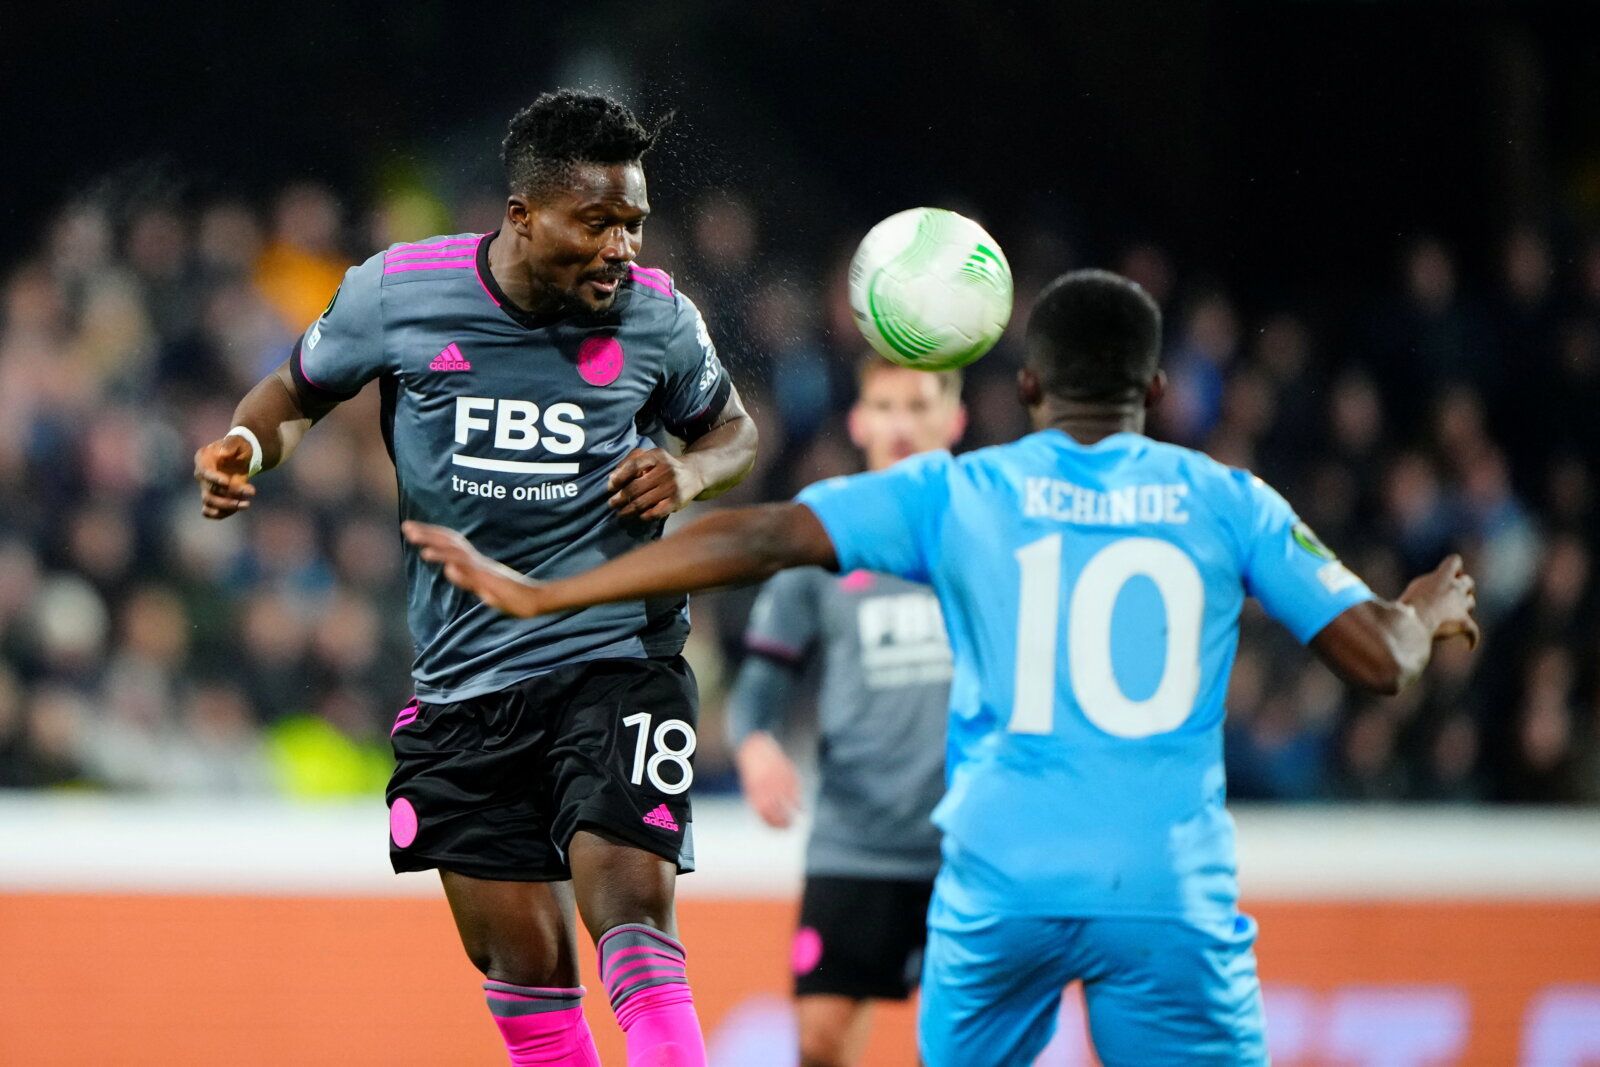 Soccer Football - Europa Conference League - Play Off Second Leg - Randers FC v Leicester City - Randers Stadium, Randers, Denmark - February 24, 2022  Randers FC's Tosin Kehinde in action with Leicester City's Daniel Amartey Bo Amstrup/Ritzau Scanpix via REUTERS ATTENTION EDITORS - THIS IMAGE WAS PROVIDED BY A THIRD PARTY. DENMARK OUT. NO COMMERCIAL OR EDITORIAL SALES IN DENMARK.